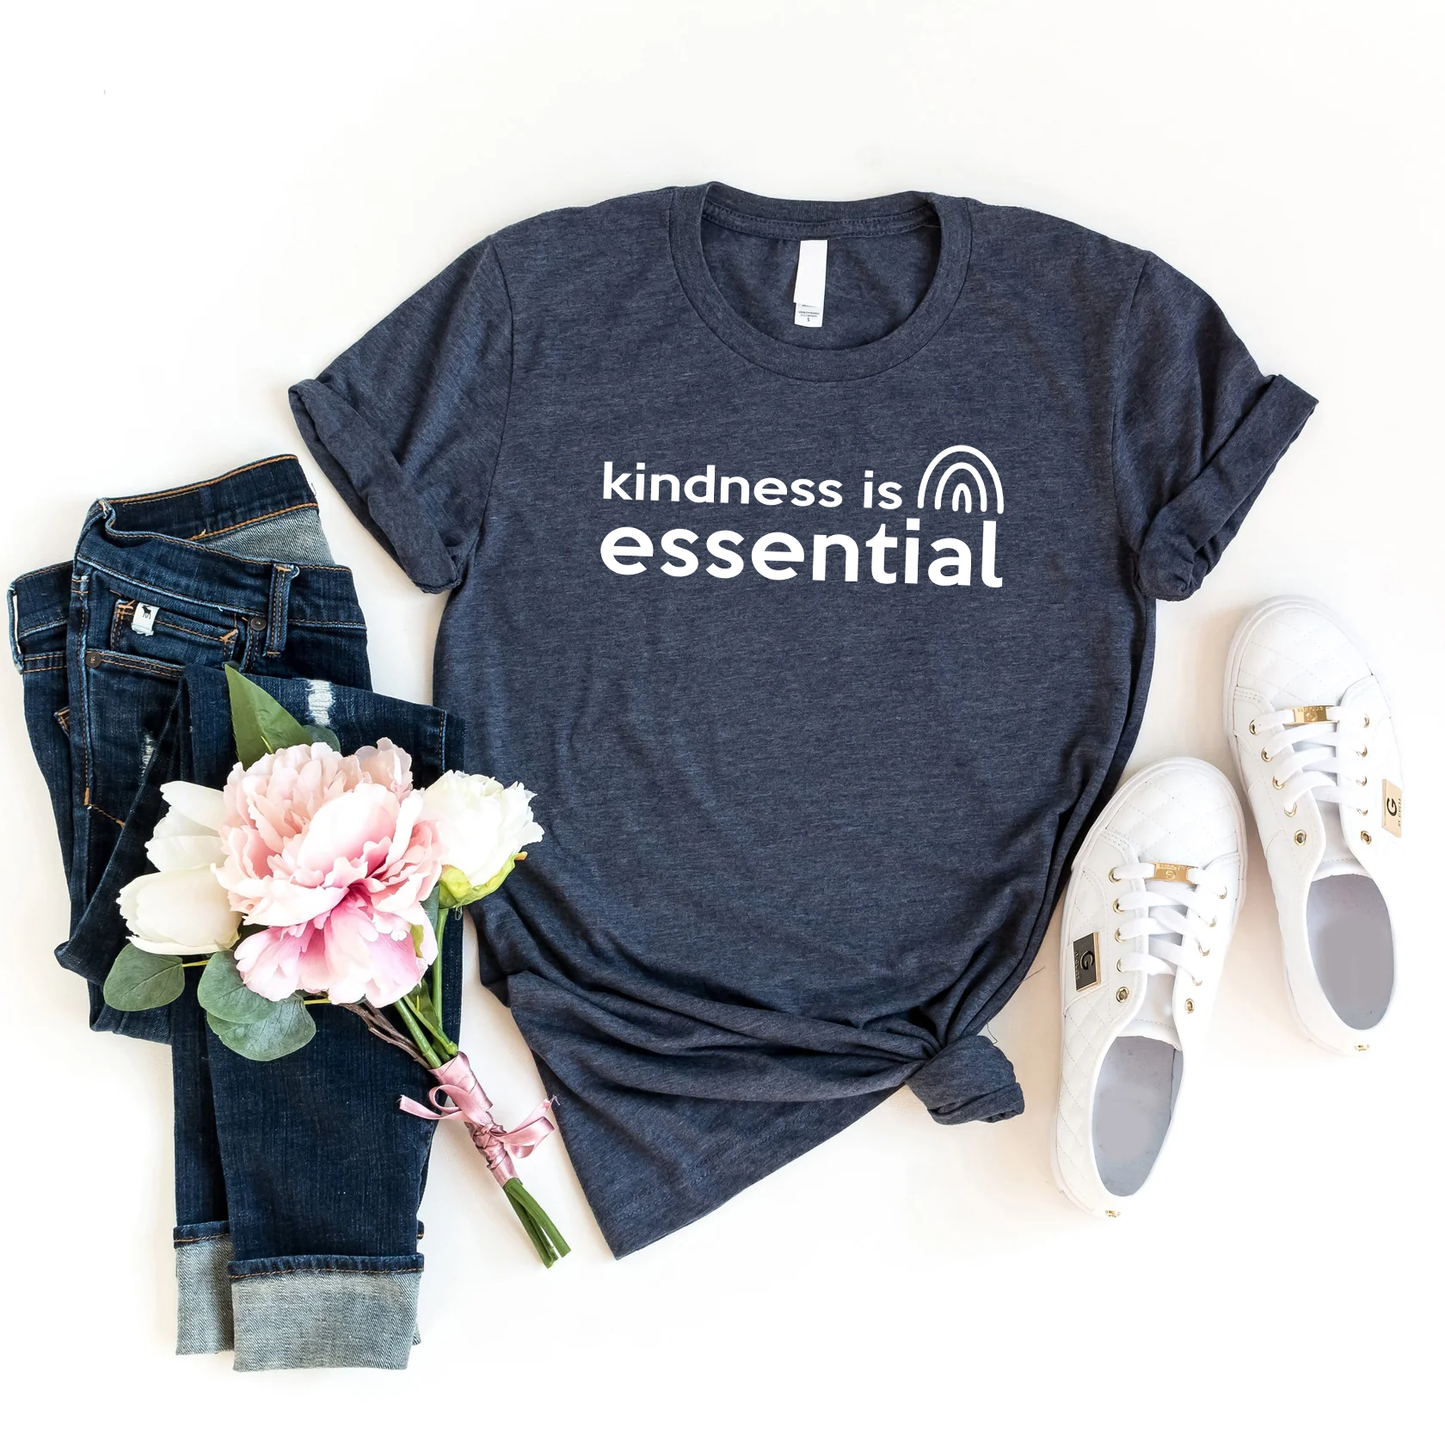 Kindness is Essential T-Shirt